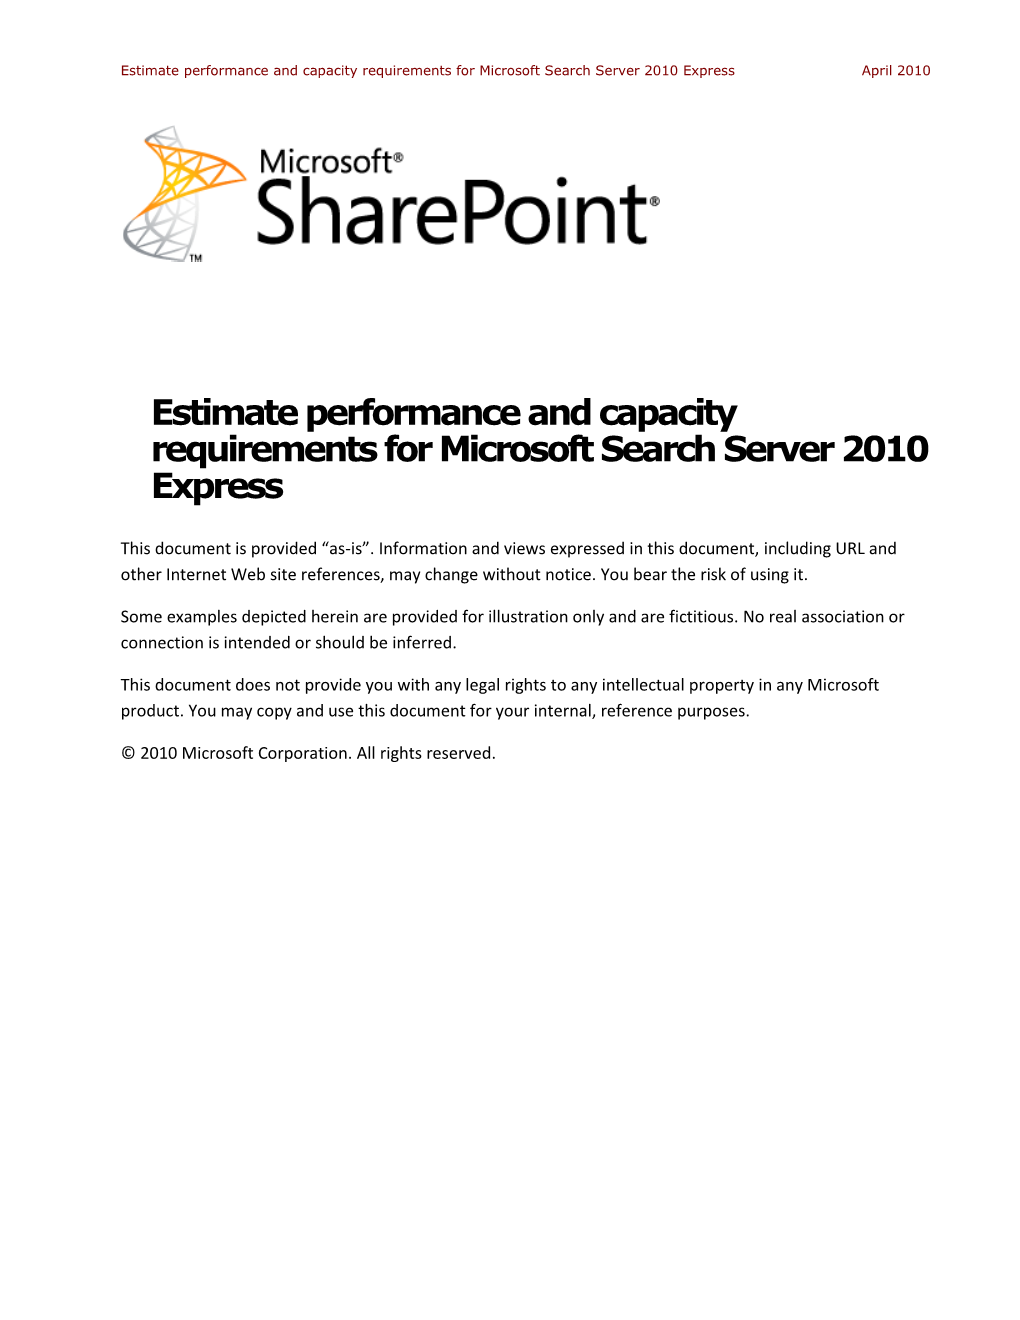 Estimate Performance and Capacity Requirements for Microsoft Search Server 2010 Express April 2010